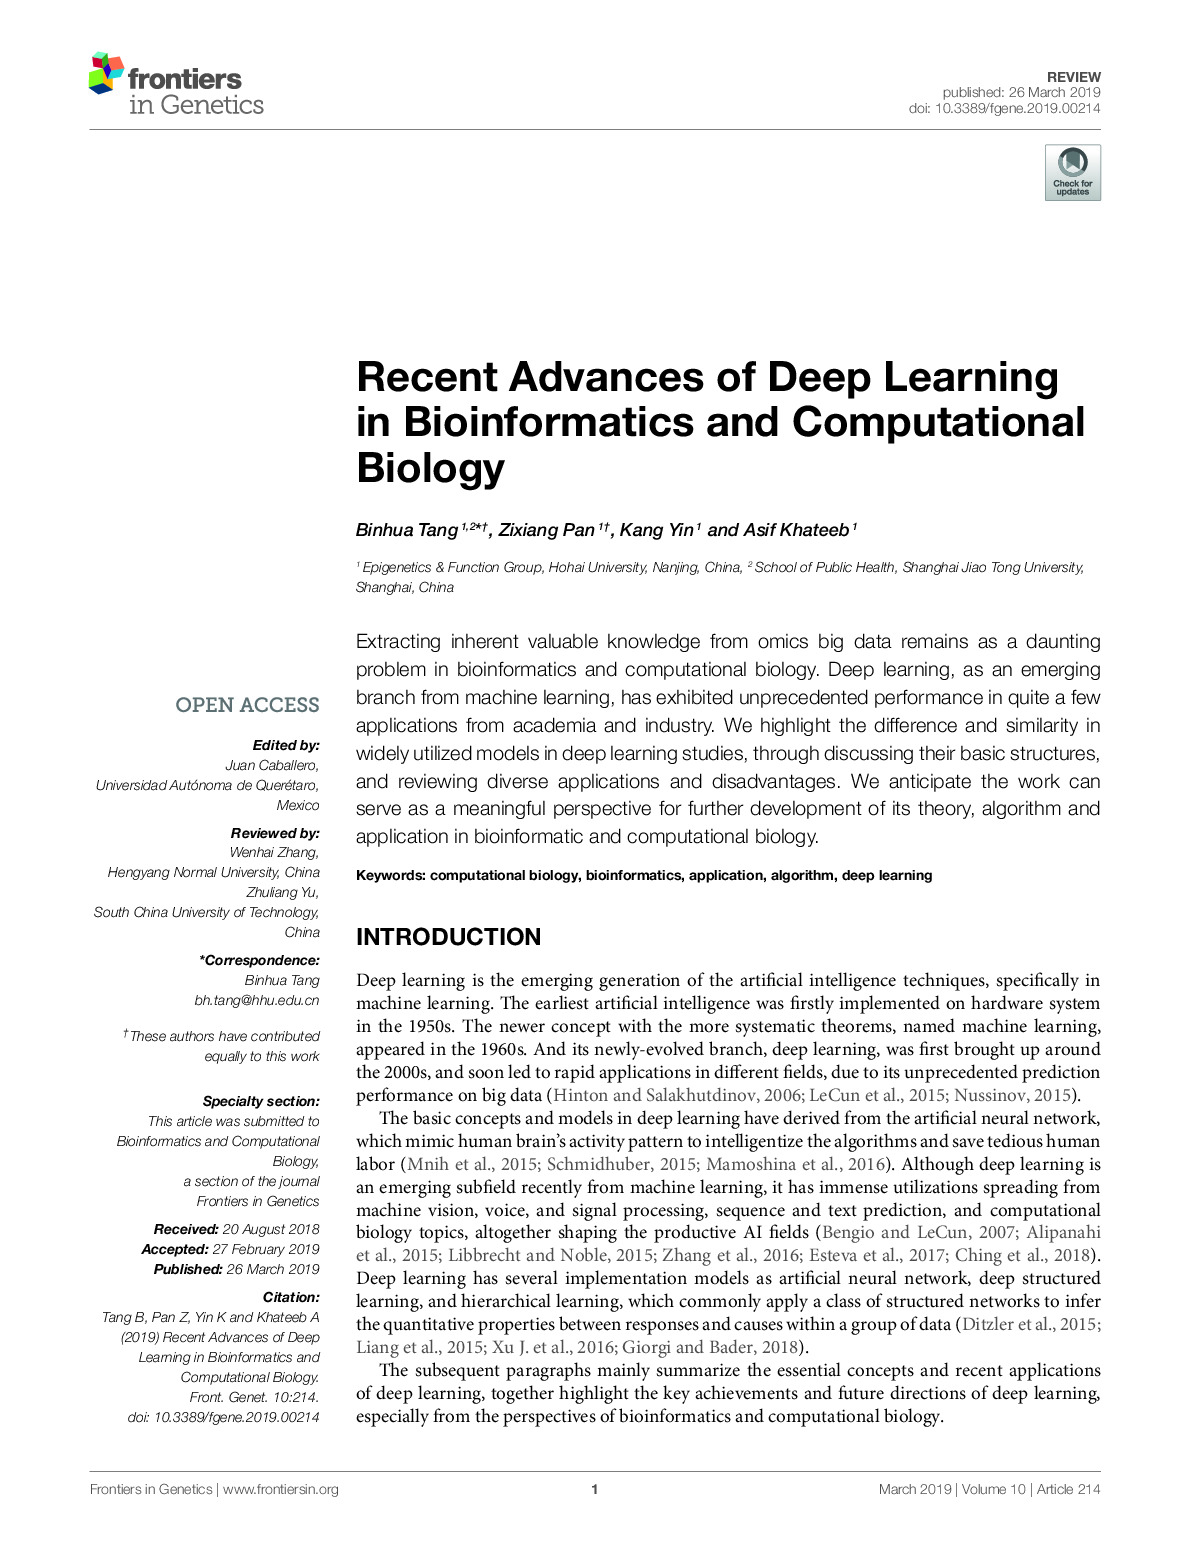 Recent Advances of Deep Learning in Bioinformatics and Comutational Biology